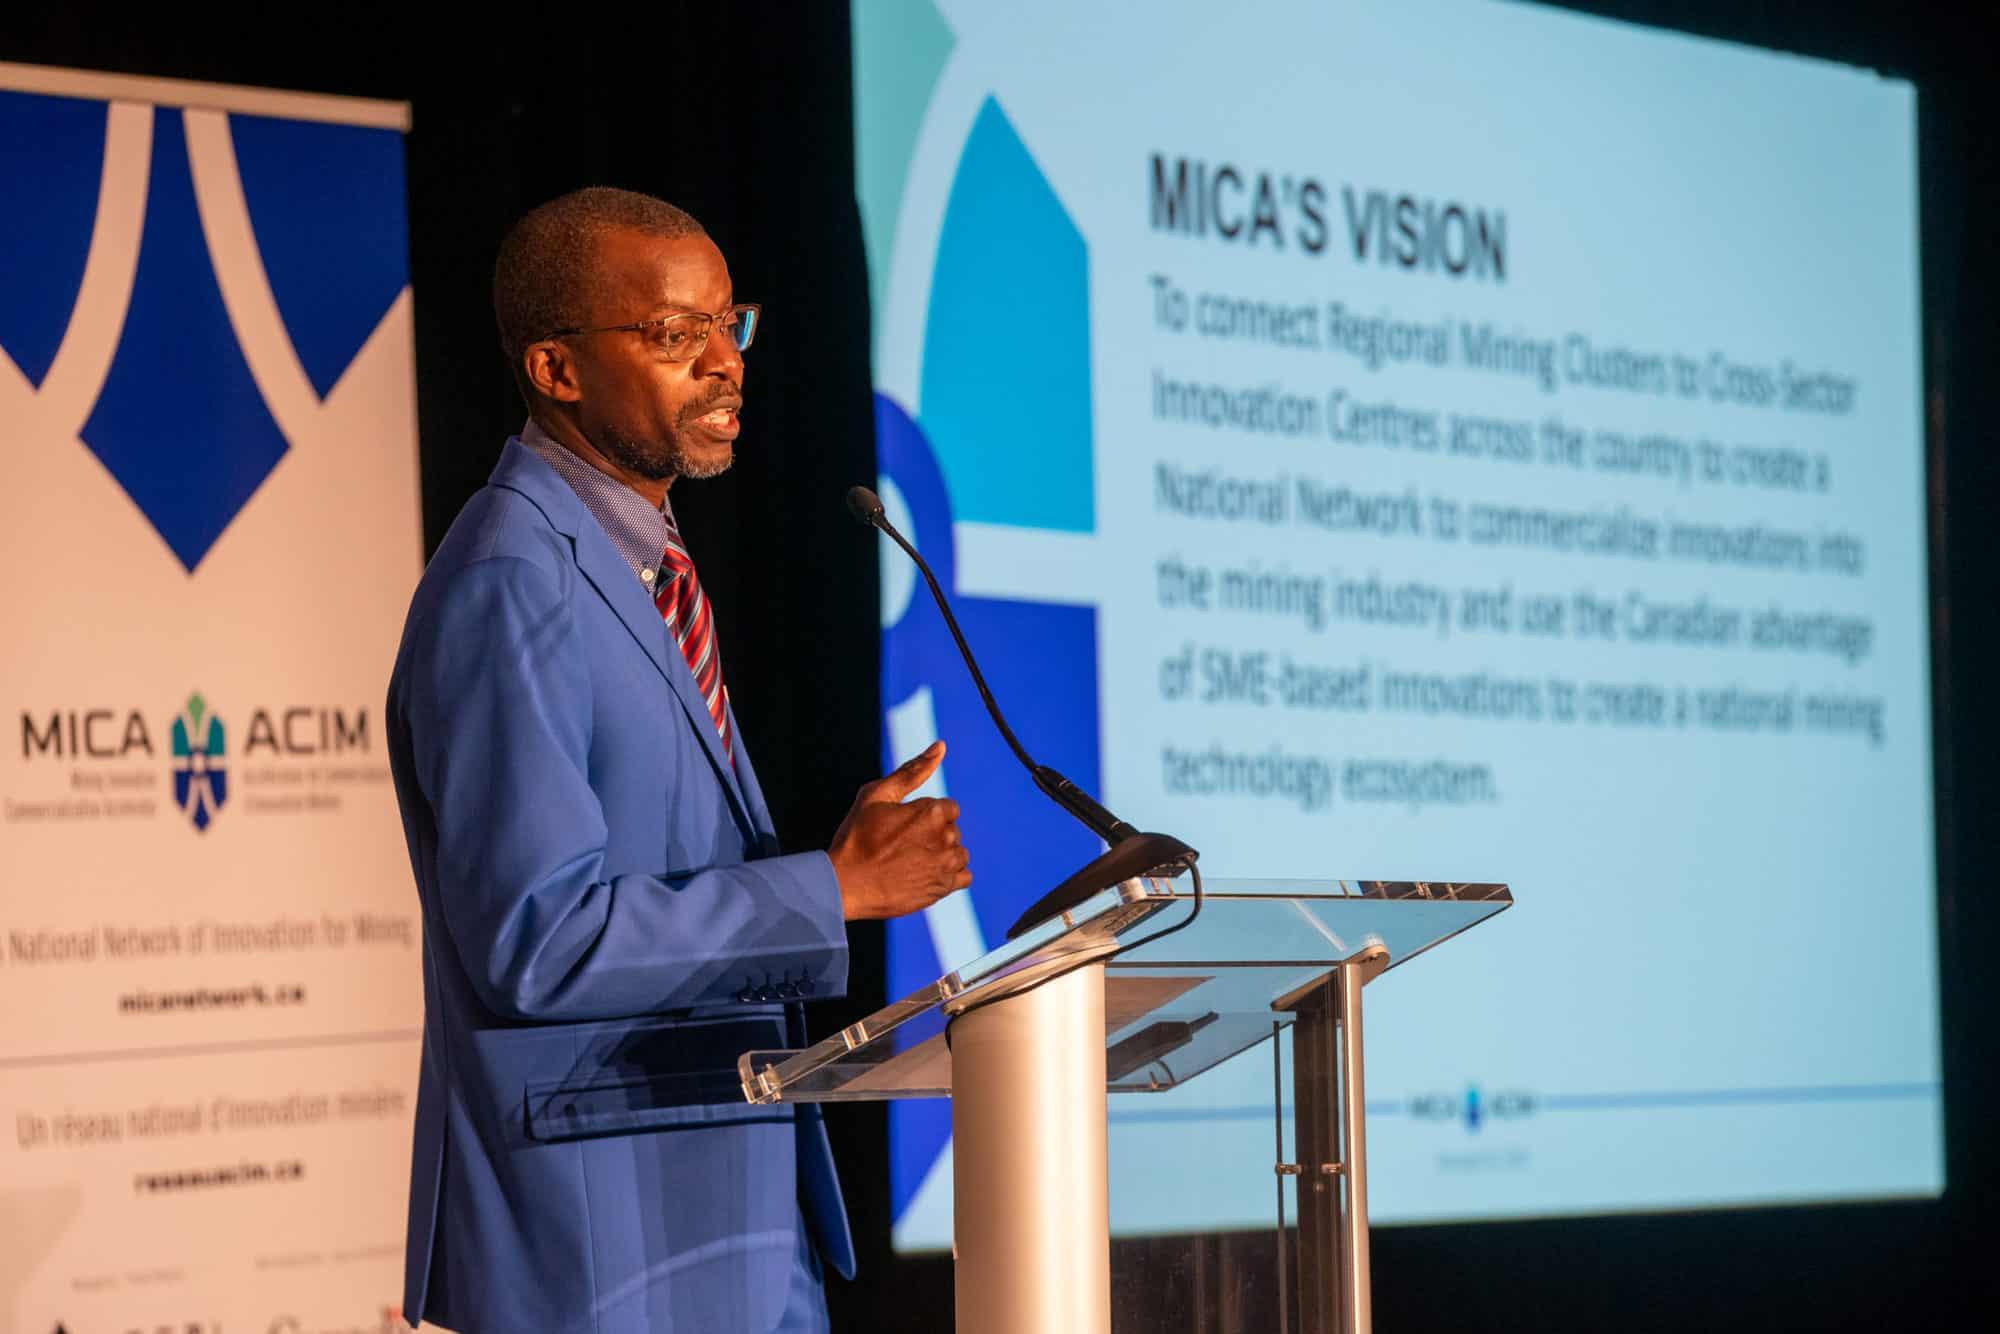 Product Mining Innovation Commercialization Accelerator (MICA) Network Launches: - MICA image